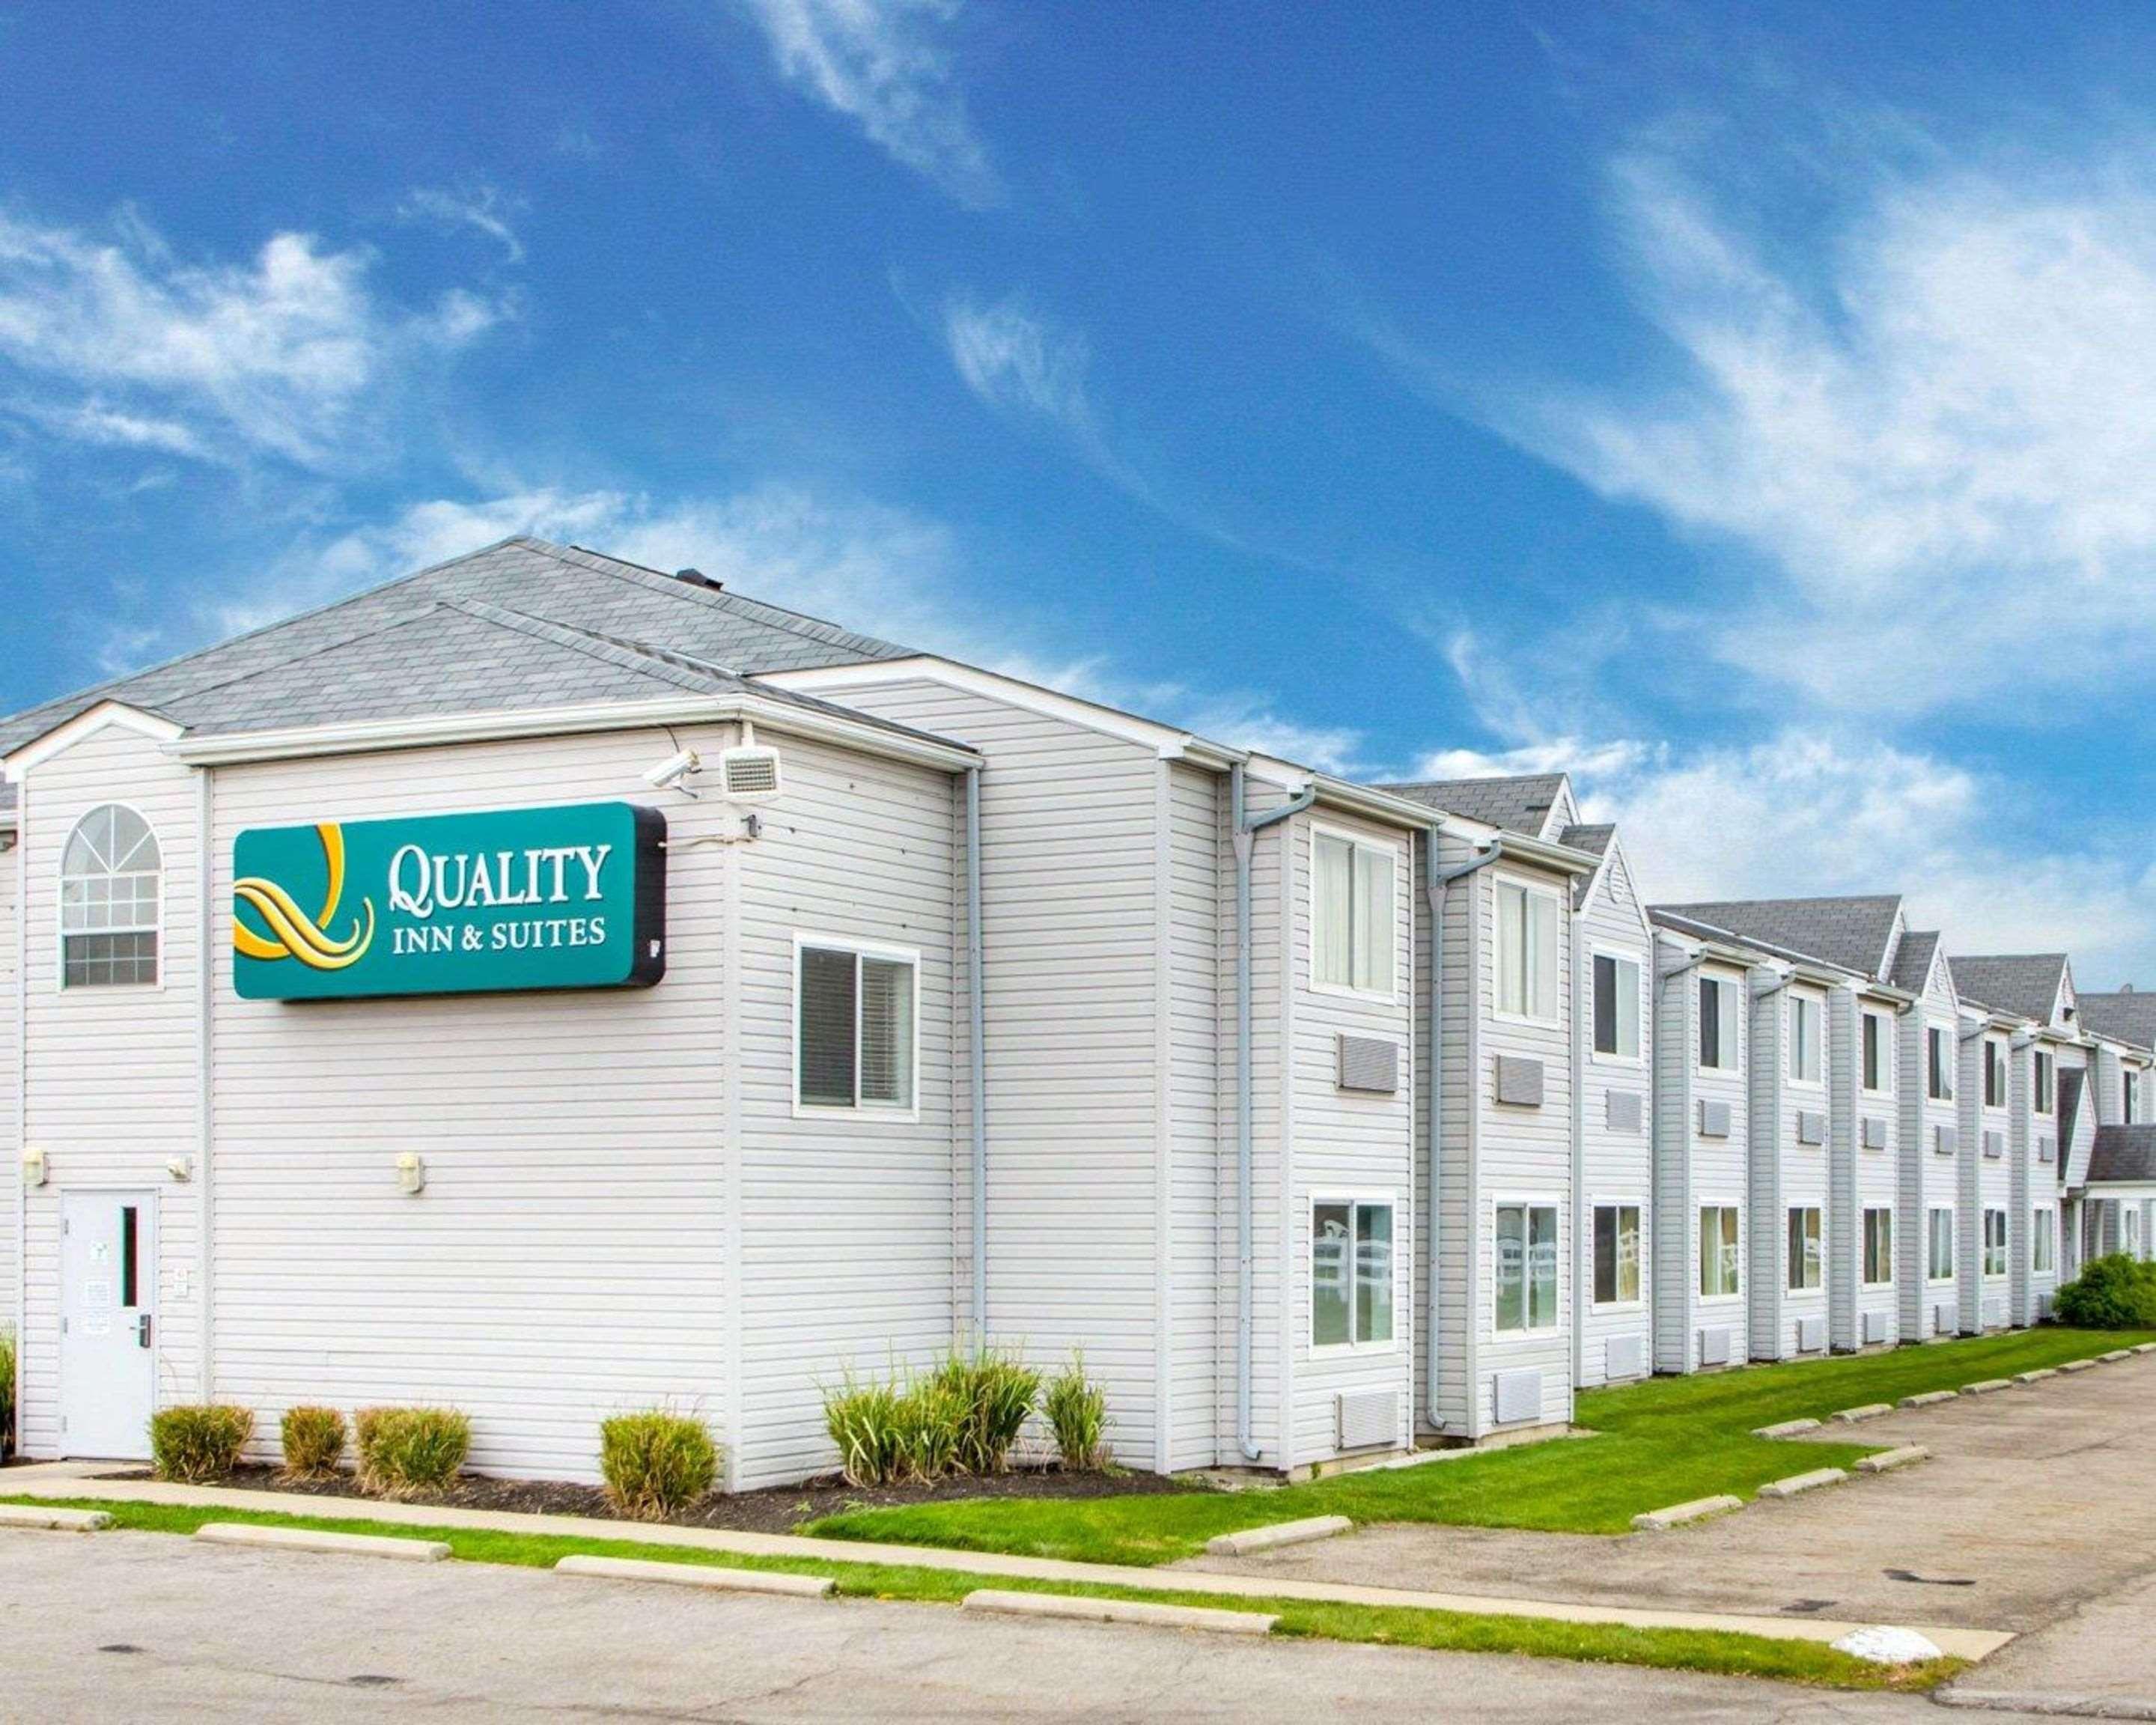 Quality Inn and Suites image